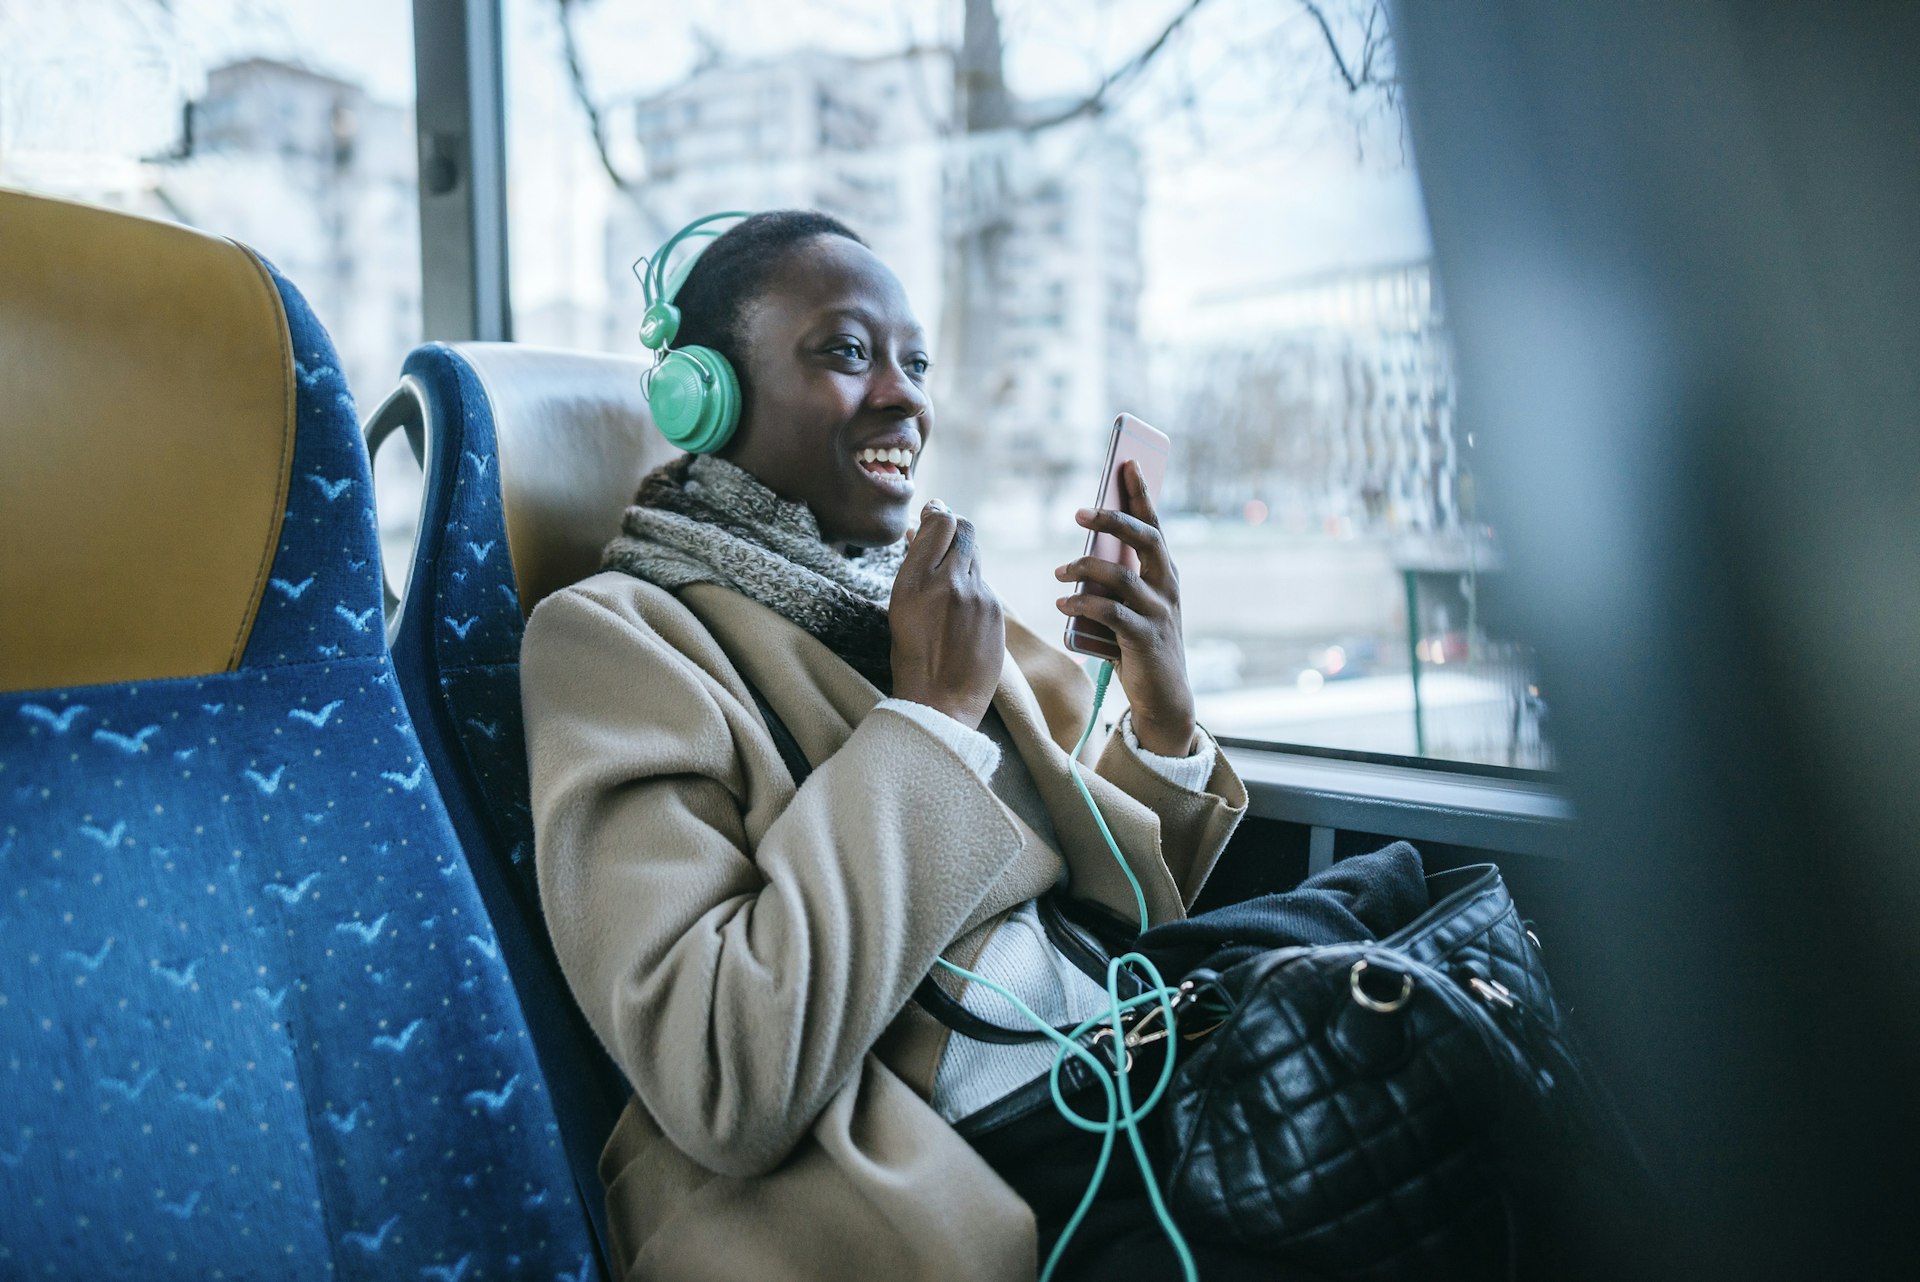 A young woman using headphones and smartphone on the stop floor of a bus in France